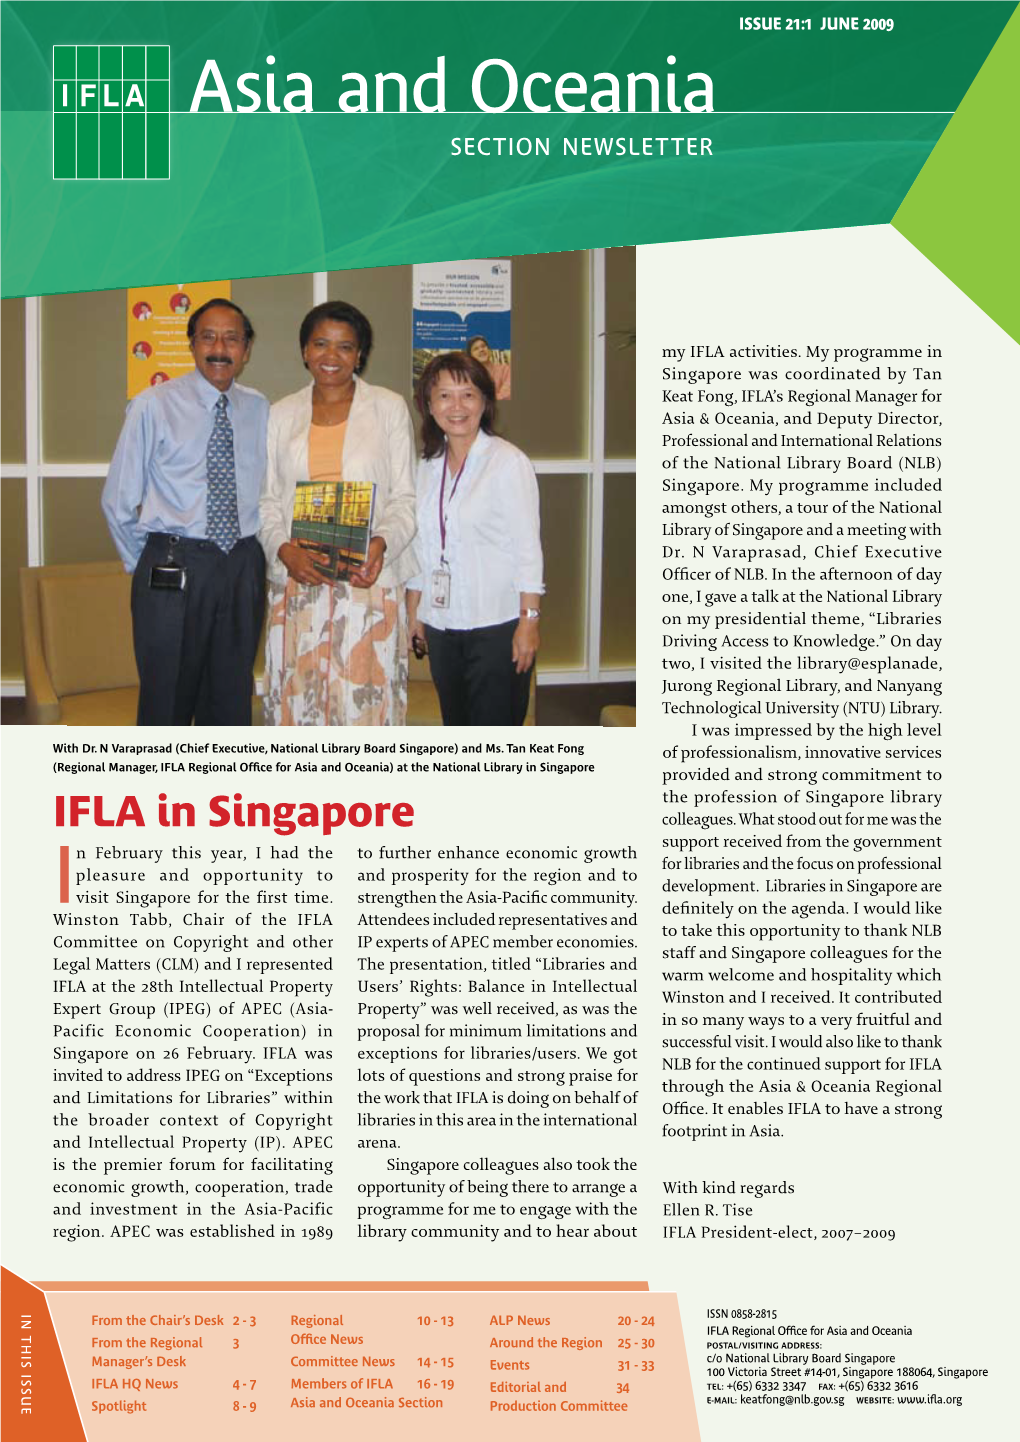 Asia and Oceania SECTION Newsletter